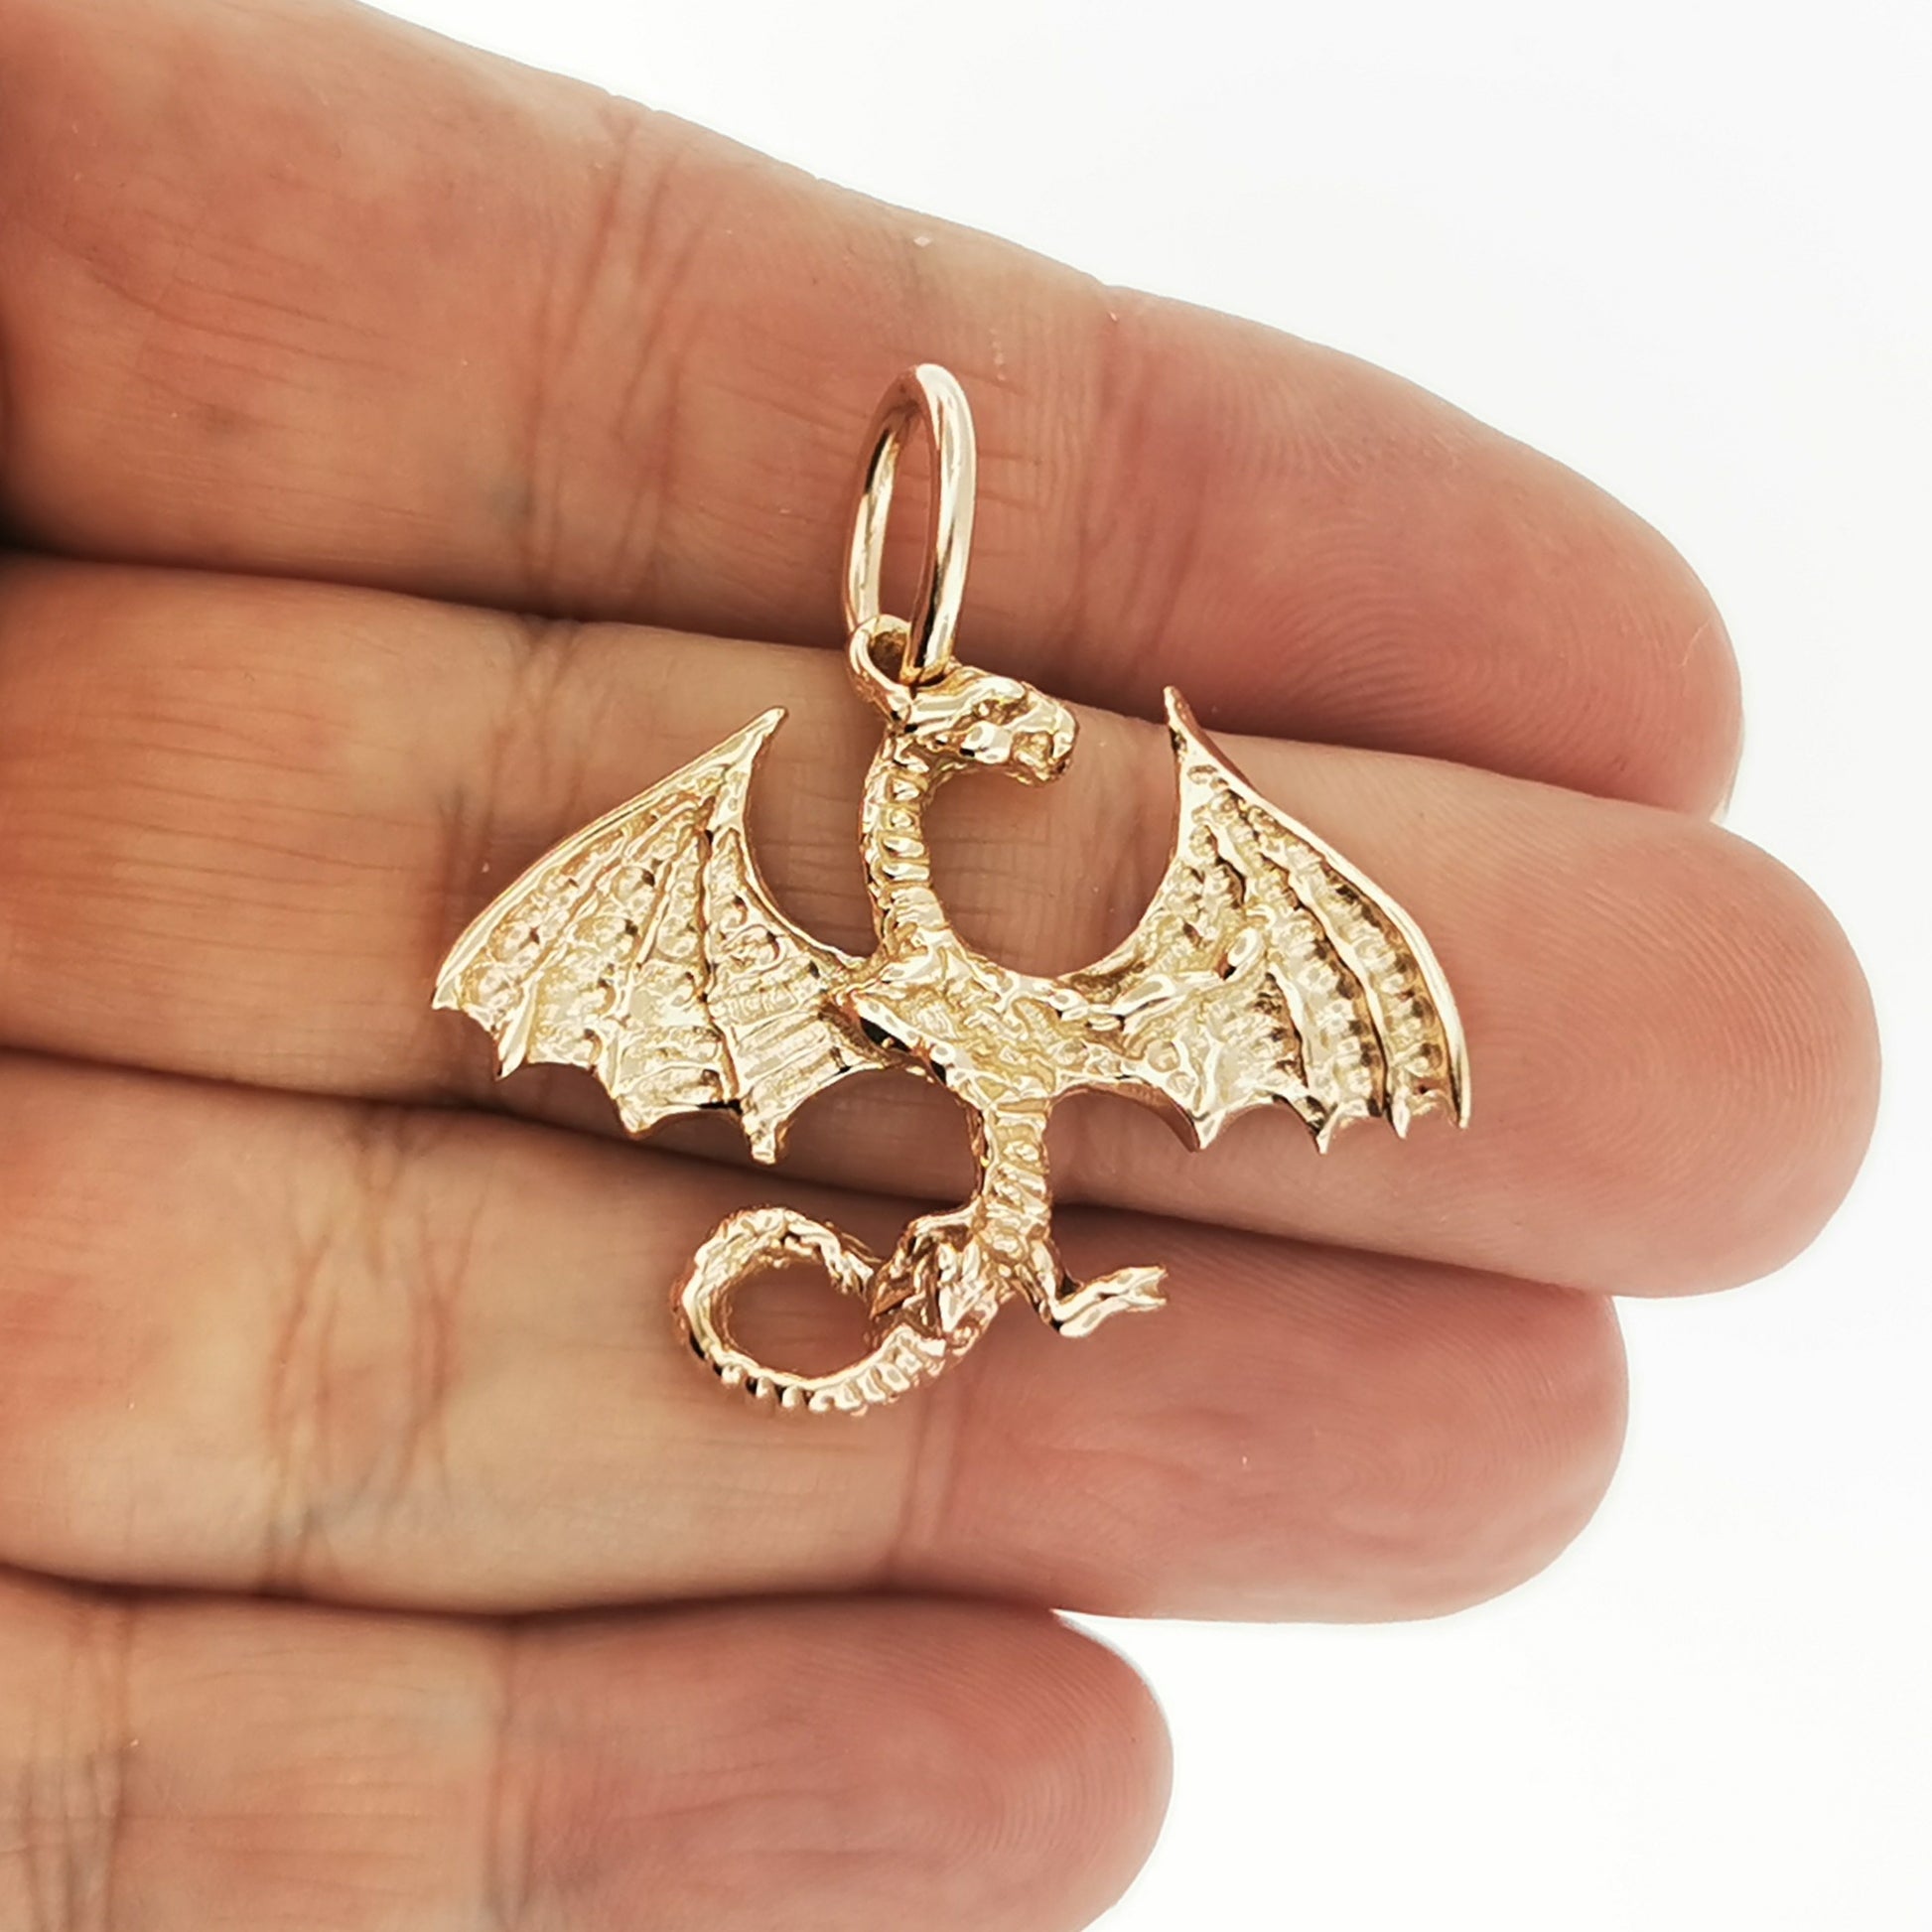 European Dragon Pendant in Sterling Silver or Antique Bronze, Silver Dragon Pendant, Silver Dragon Jewelry, Silver Dragon Jewellery, Bronze Dragon Pendant, Here Be Dragons, Silver Dragon Charm, Bronze Dragon Charm, Bronze Dragon Jewellery, Medieval Dragon Pendant, Fantasy Dragon Pendant, Bronze Dragon Charm